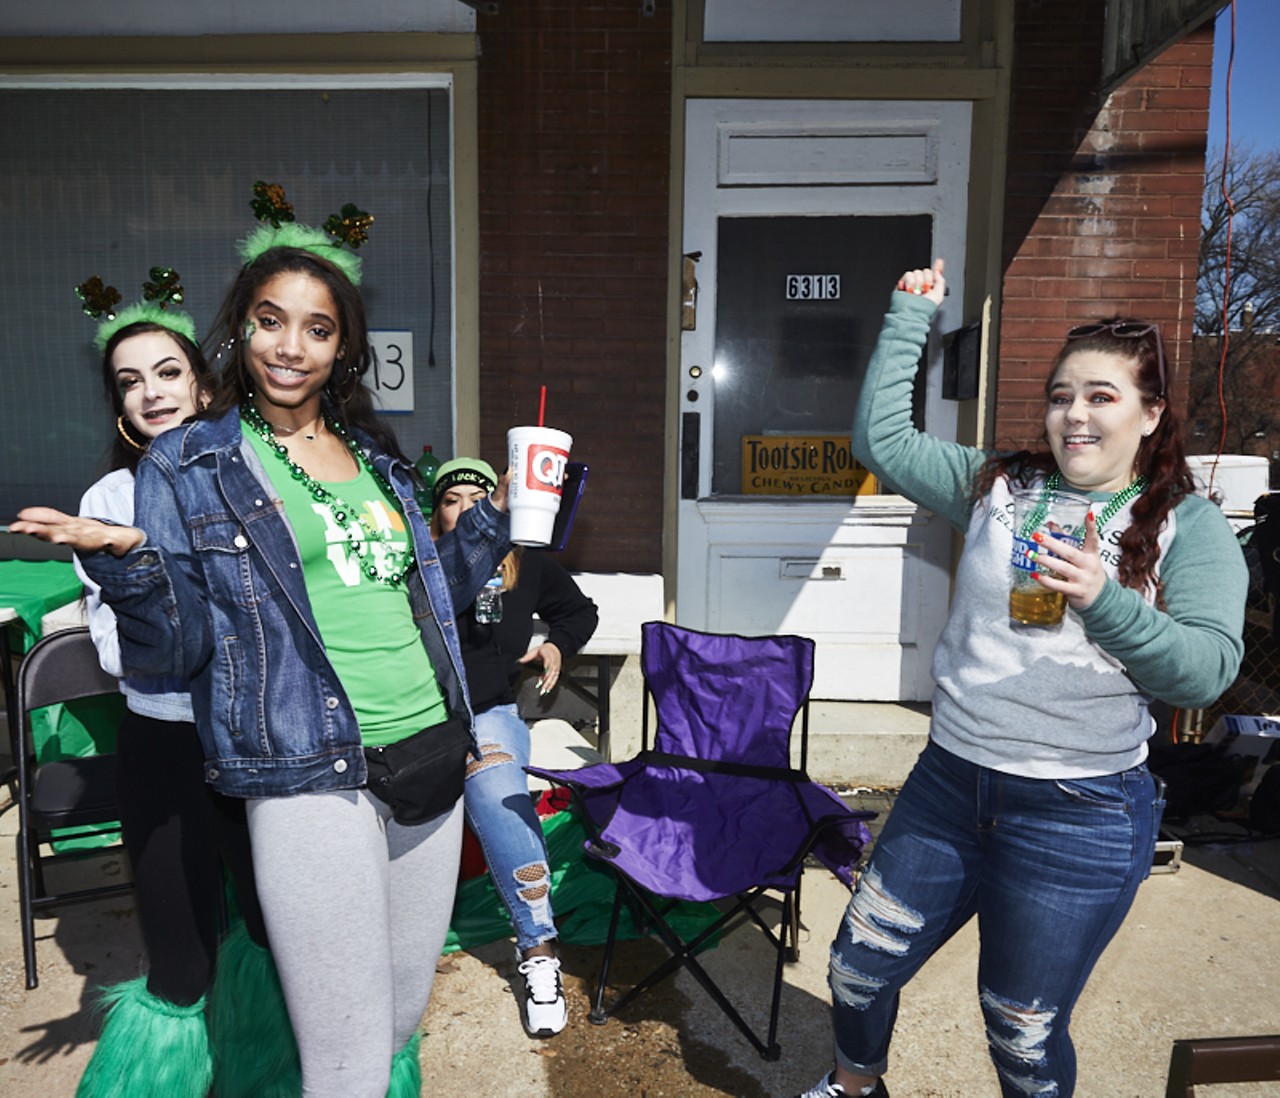 St. Patricks Day in Dogtown St. Louis MO on March 17, 2019. &copy; images Theo R. Welling